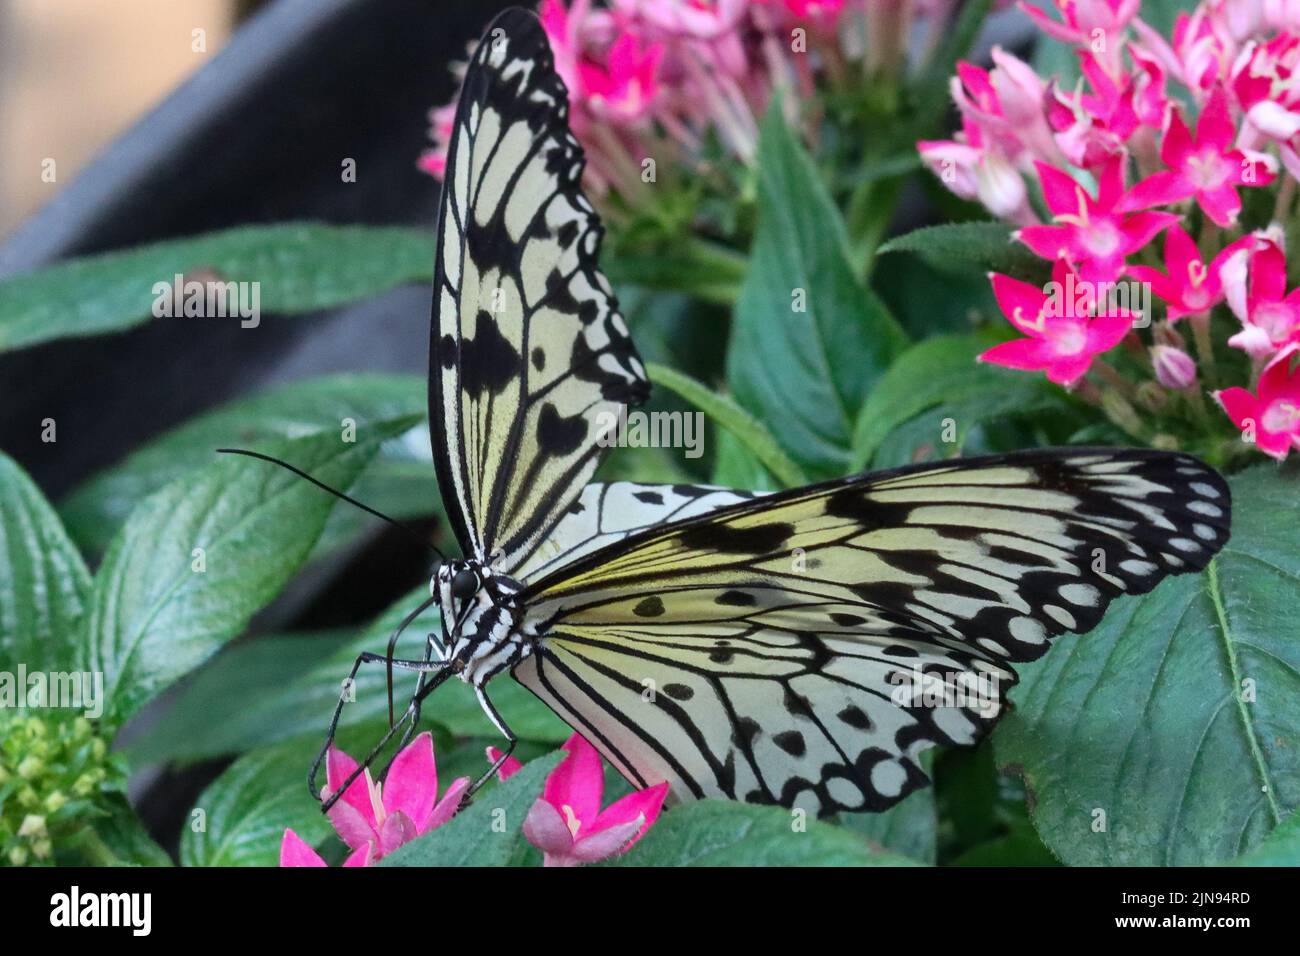 Black and white butterfly rests on a pink flower Stock Photo